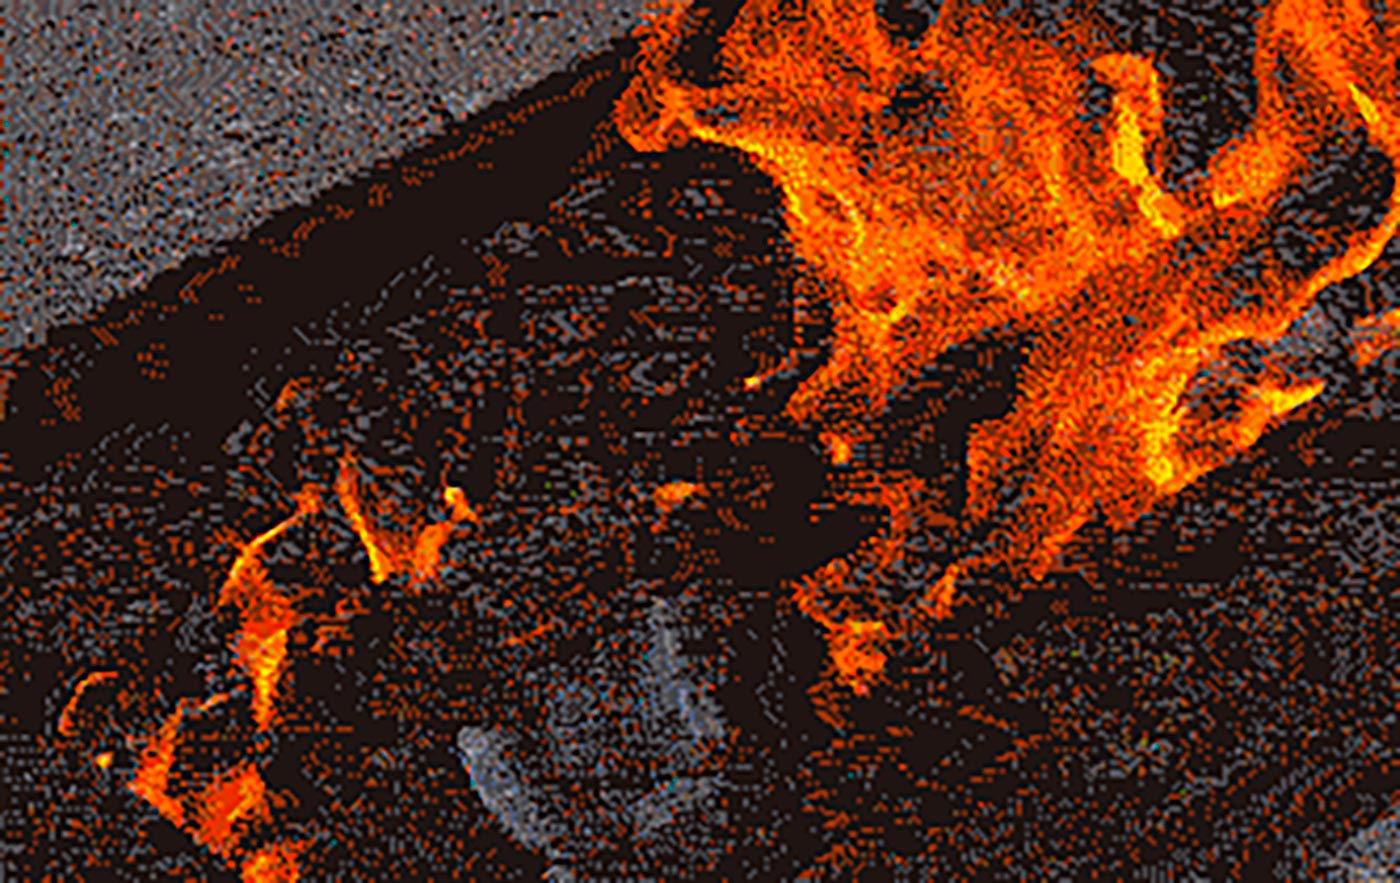 Pixelated closeup of burning flames within a boundary.